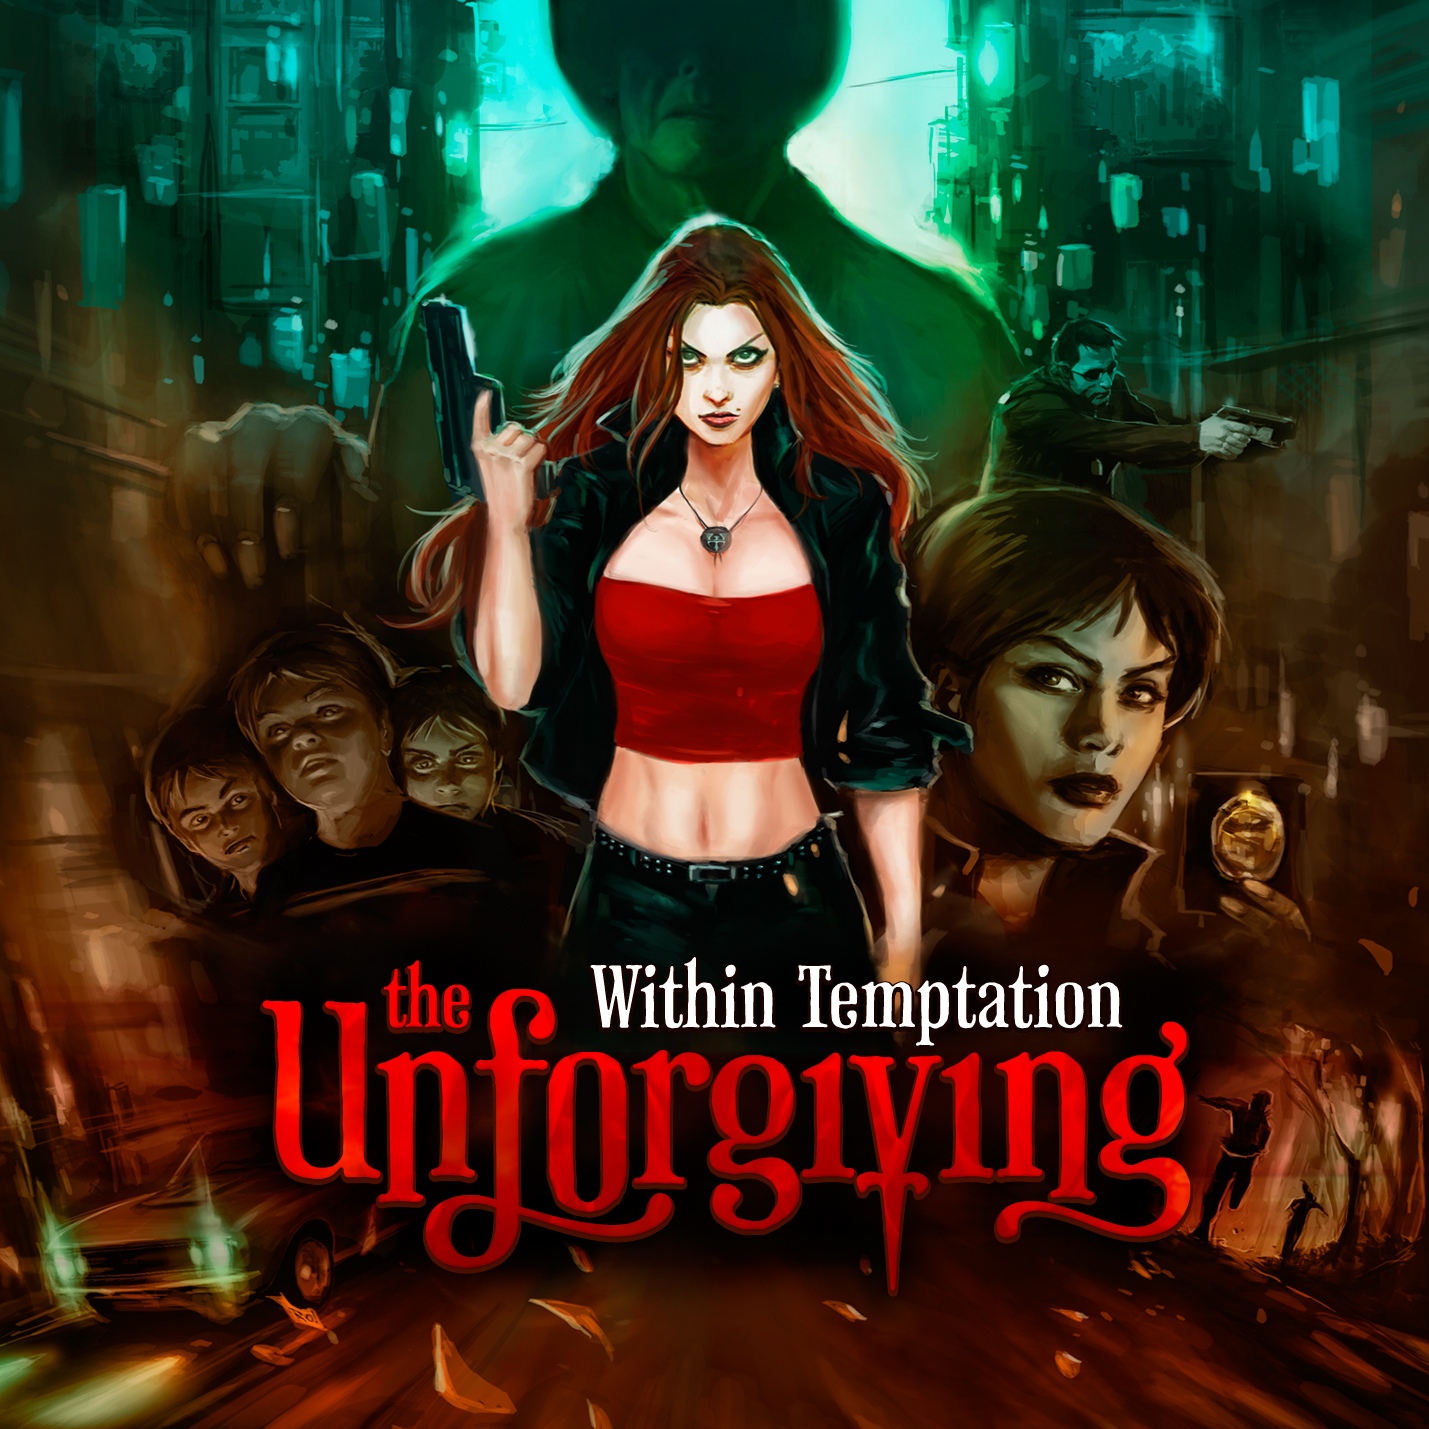 Within Temptation - The Unforgiving (2011)